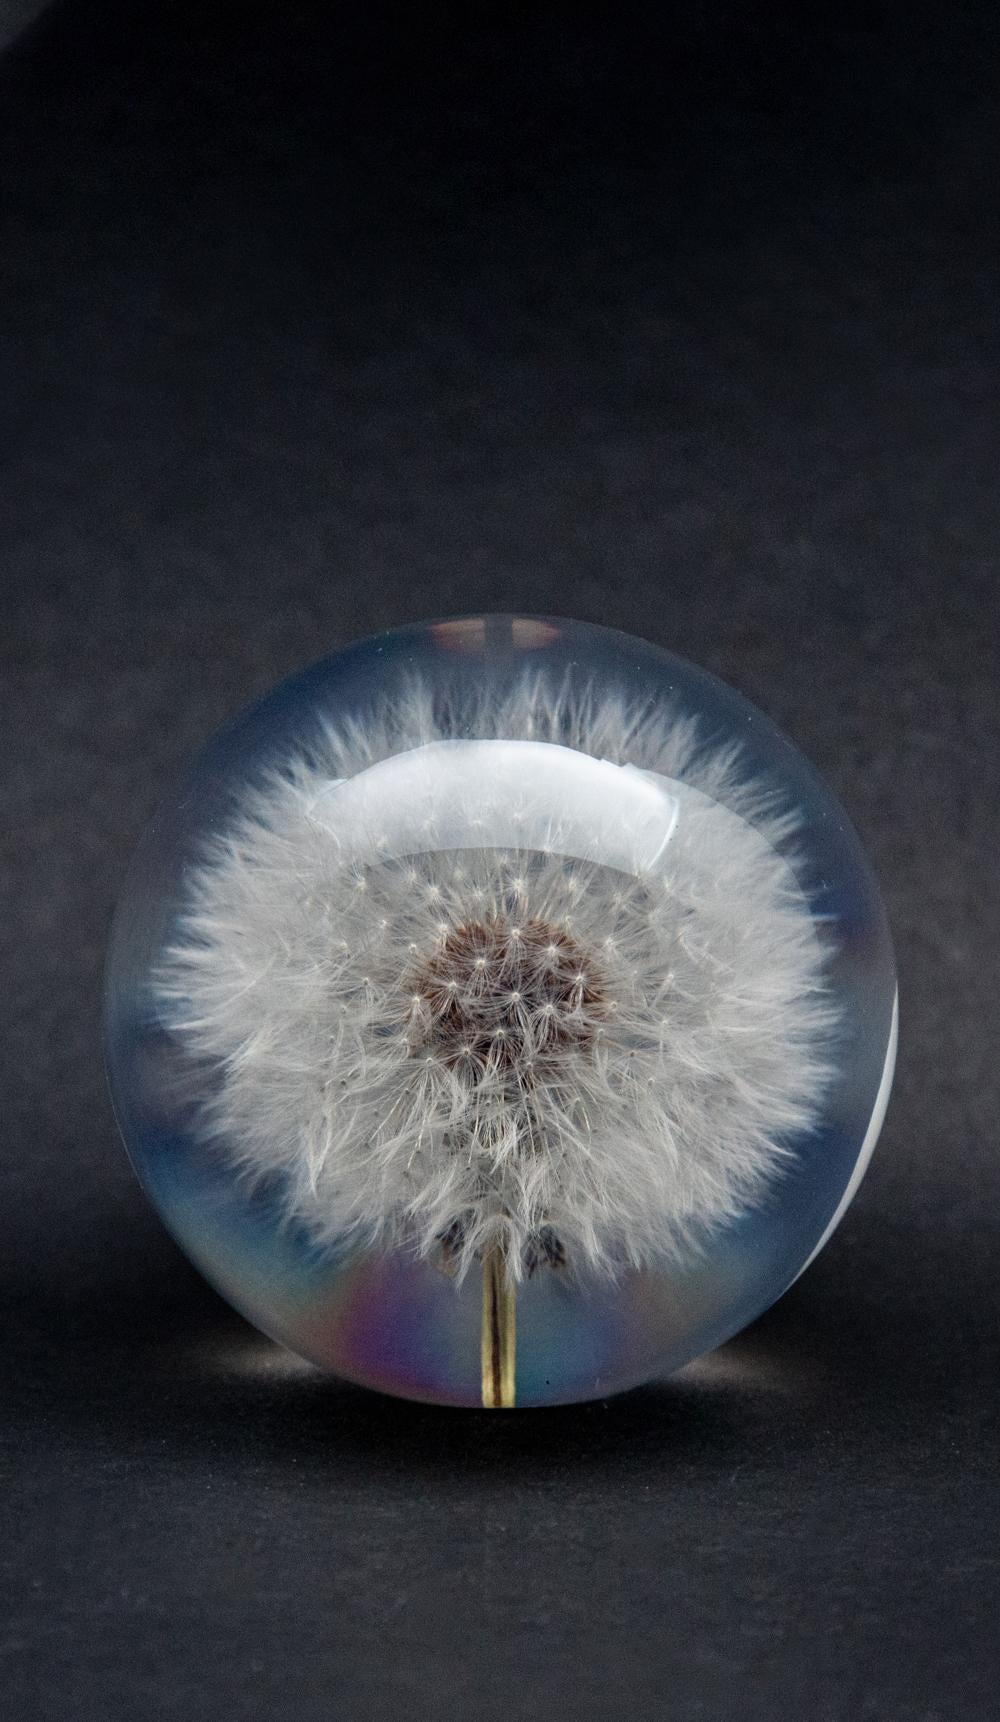 Dandelion paperweight. Created from an encased, natural white fluffy dandelion. Measure: 3